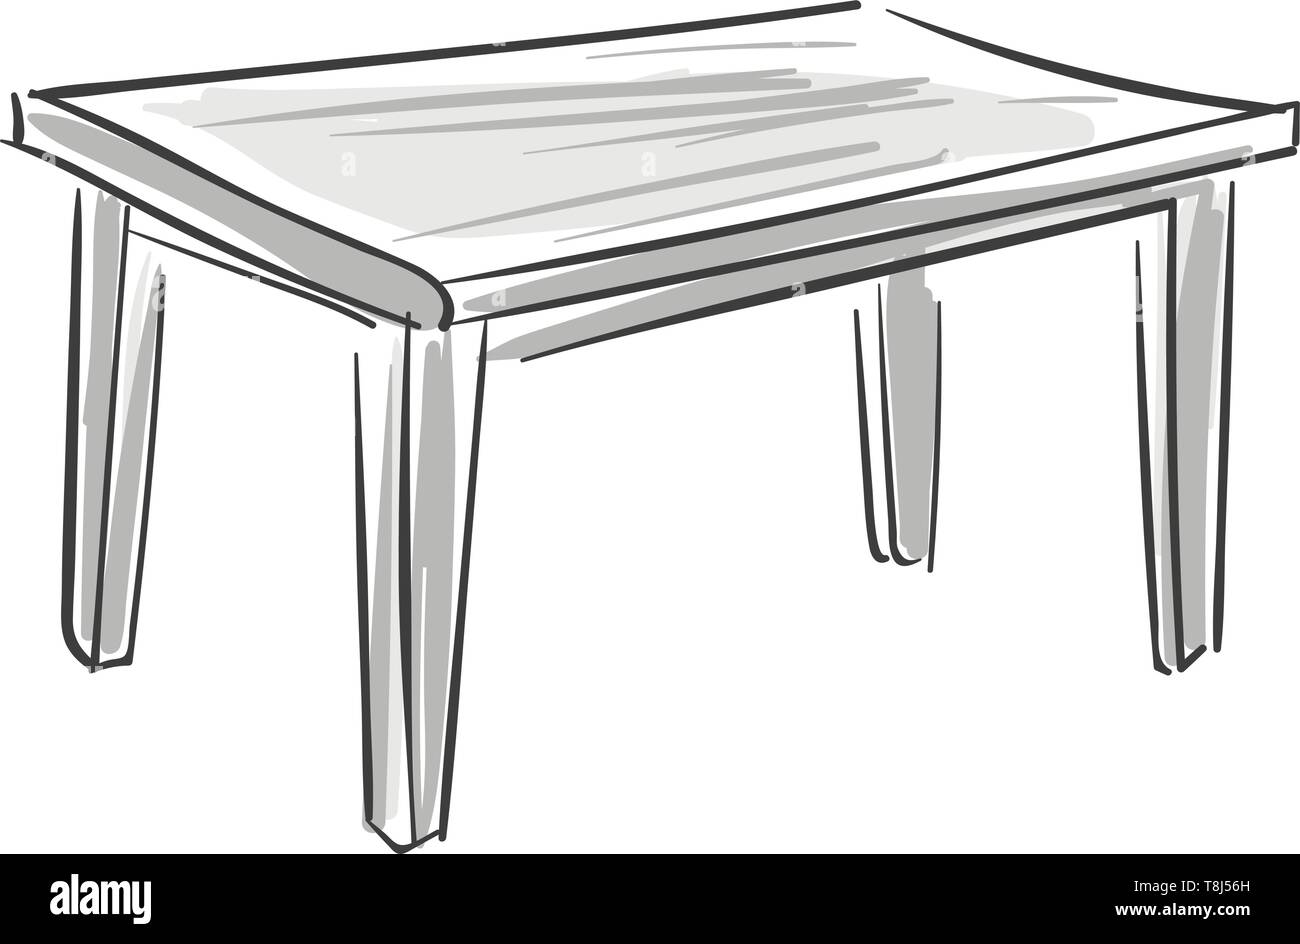 A Sketch Of A Grey Table With Four Long Legs Vector Color